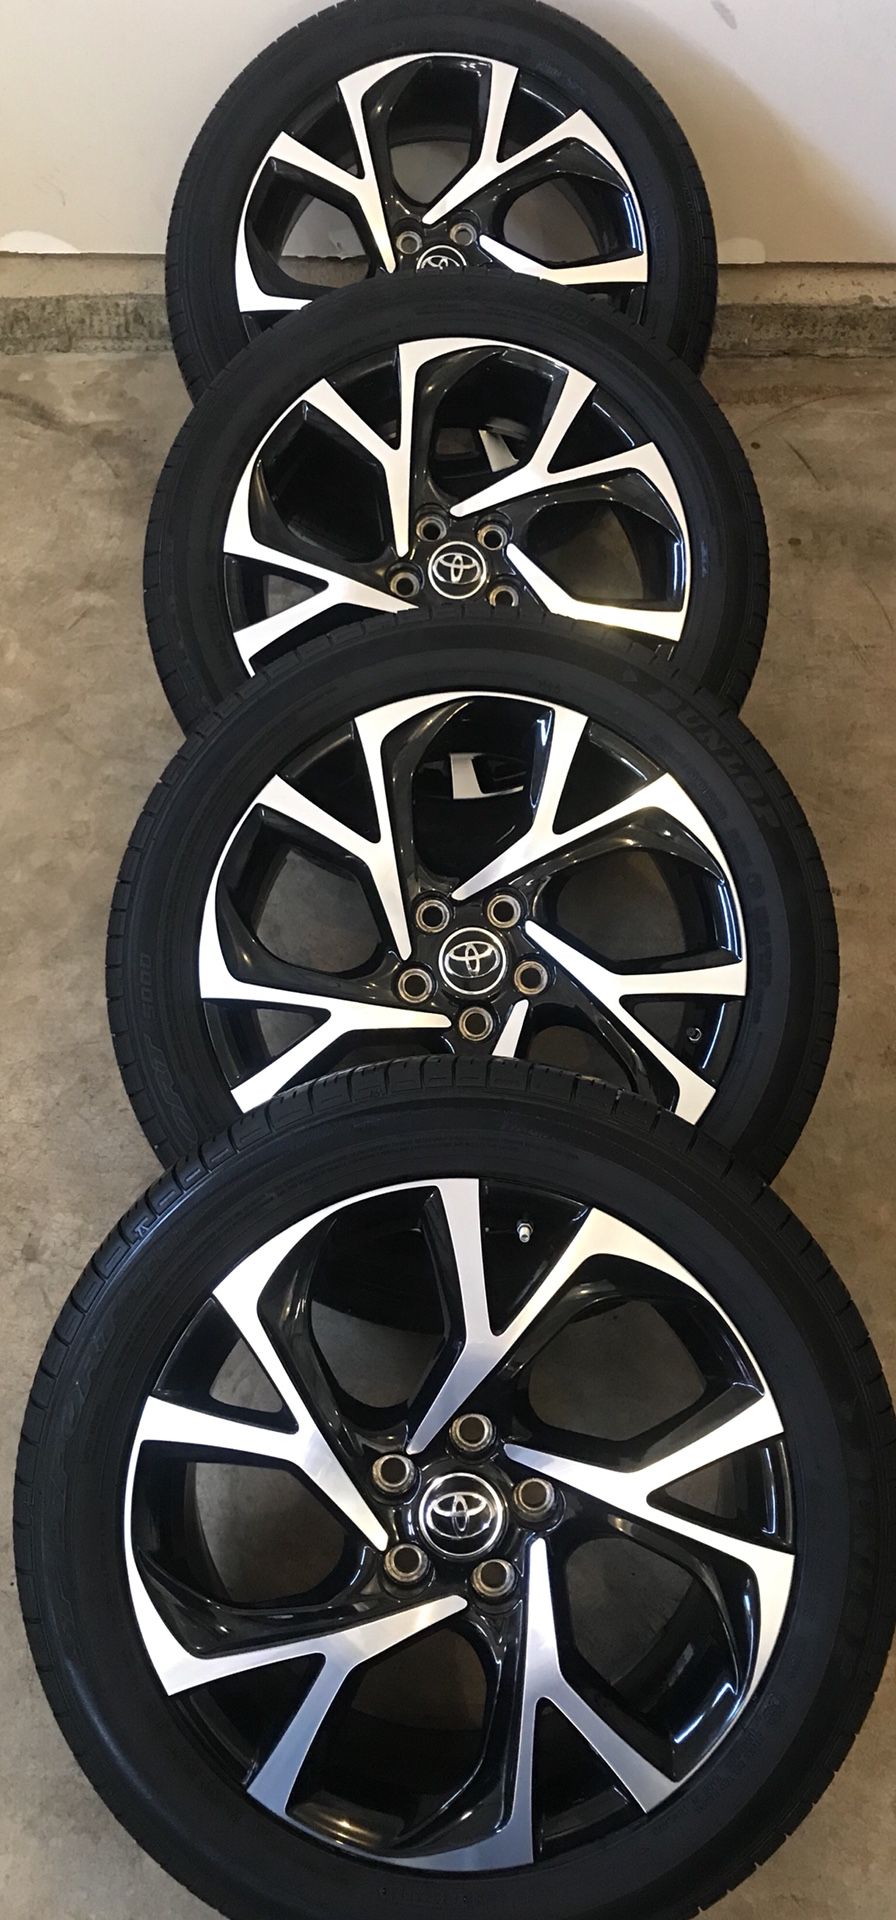 18” Toyota OEM rims and tires